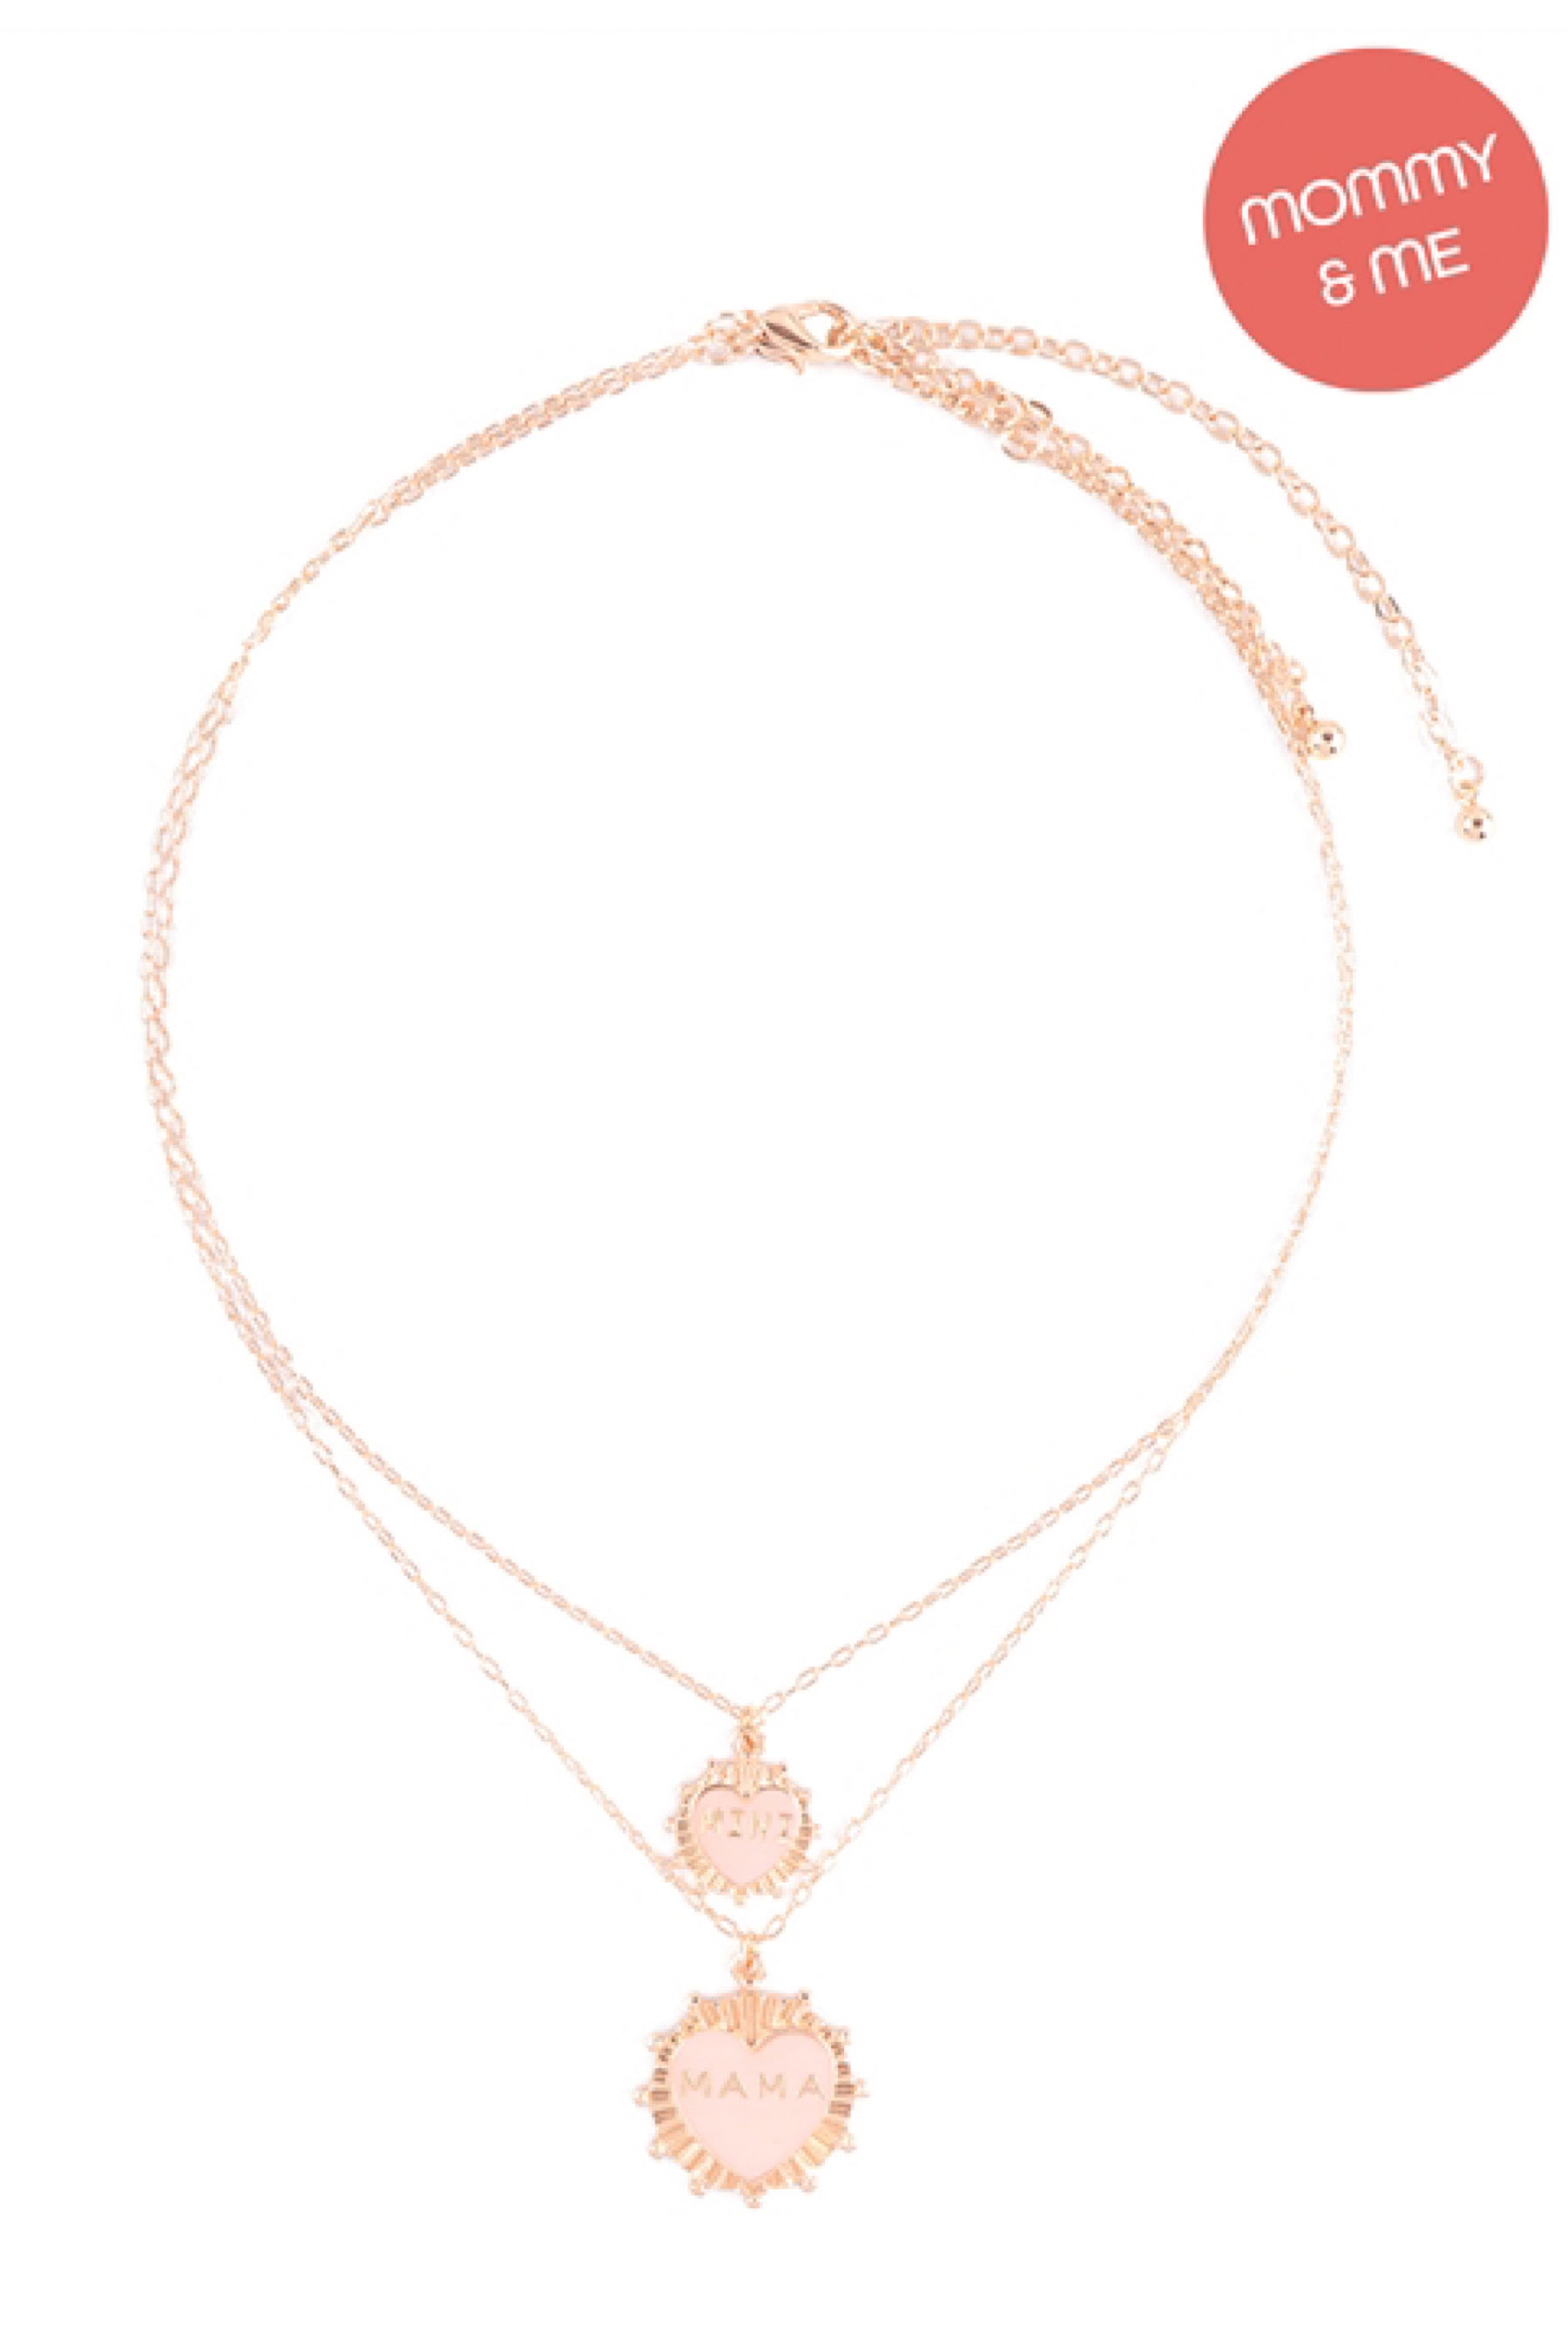 Mama & Me Pink Heart Necklace Set